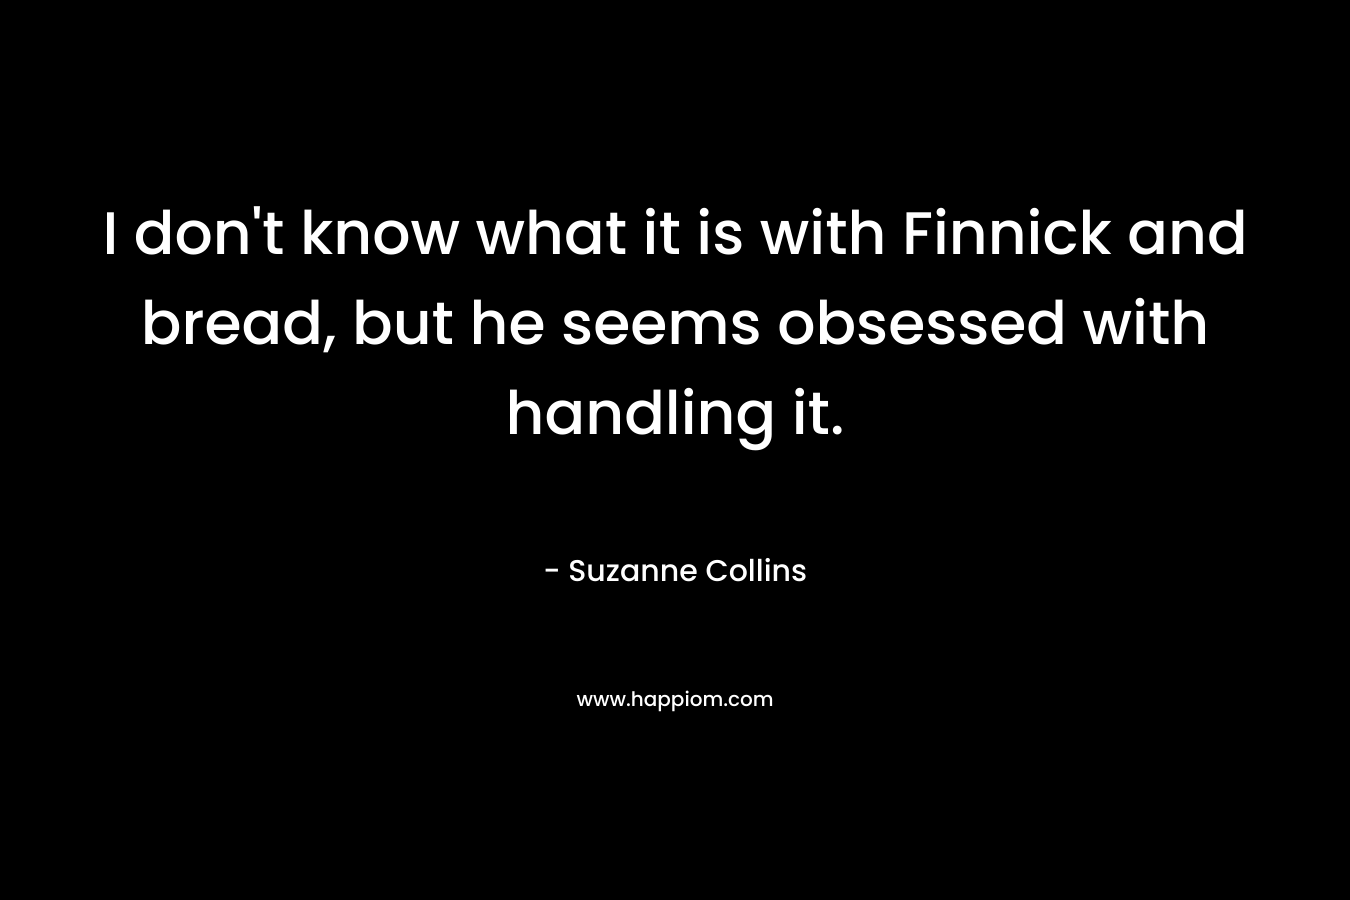 I don’t know what it is with Finnick and bread, but he seems obsessed with handling it. – Suzanne Collins